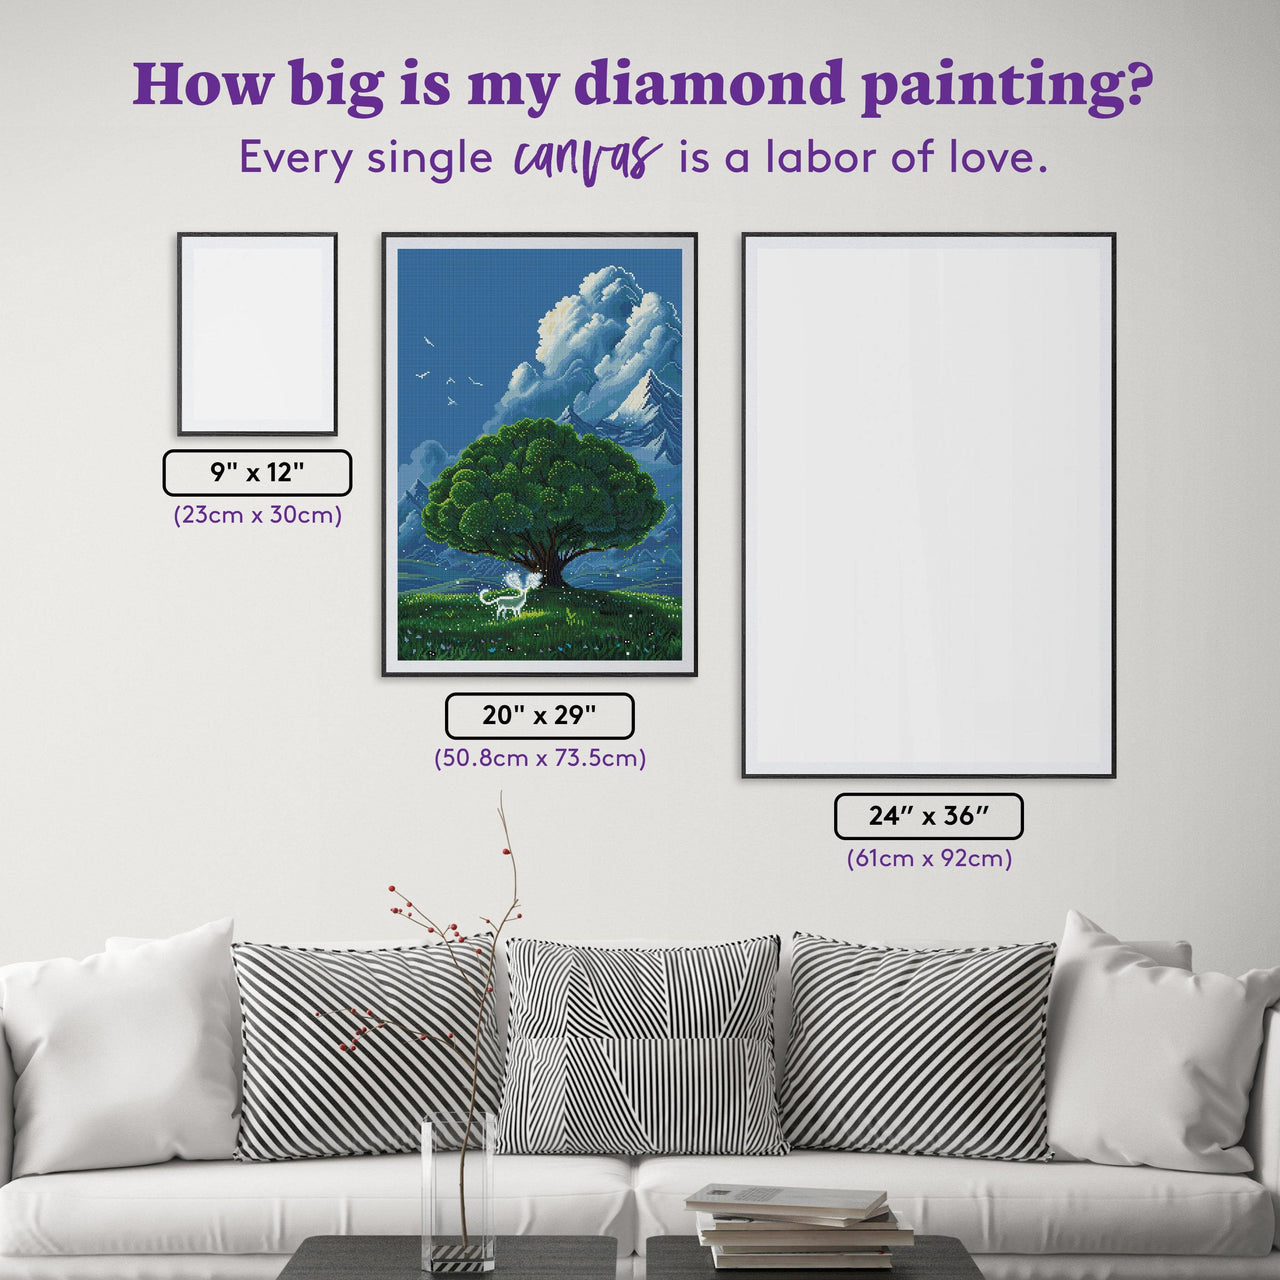 Diamond Painting Big Tree with Deer 20" x 29" (50.8cm x 73.5cm) / Square with 35 Colors including 3 ABs and 1 Fairy Dust Diamonds / 60,180